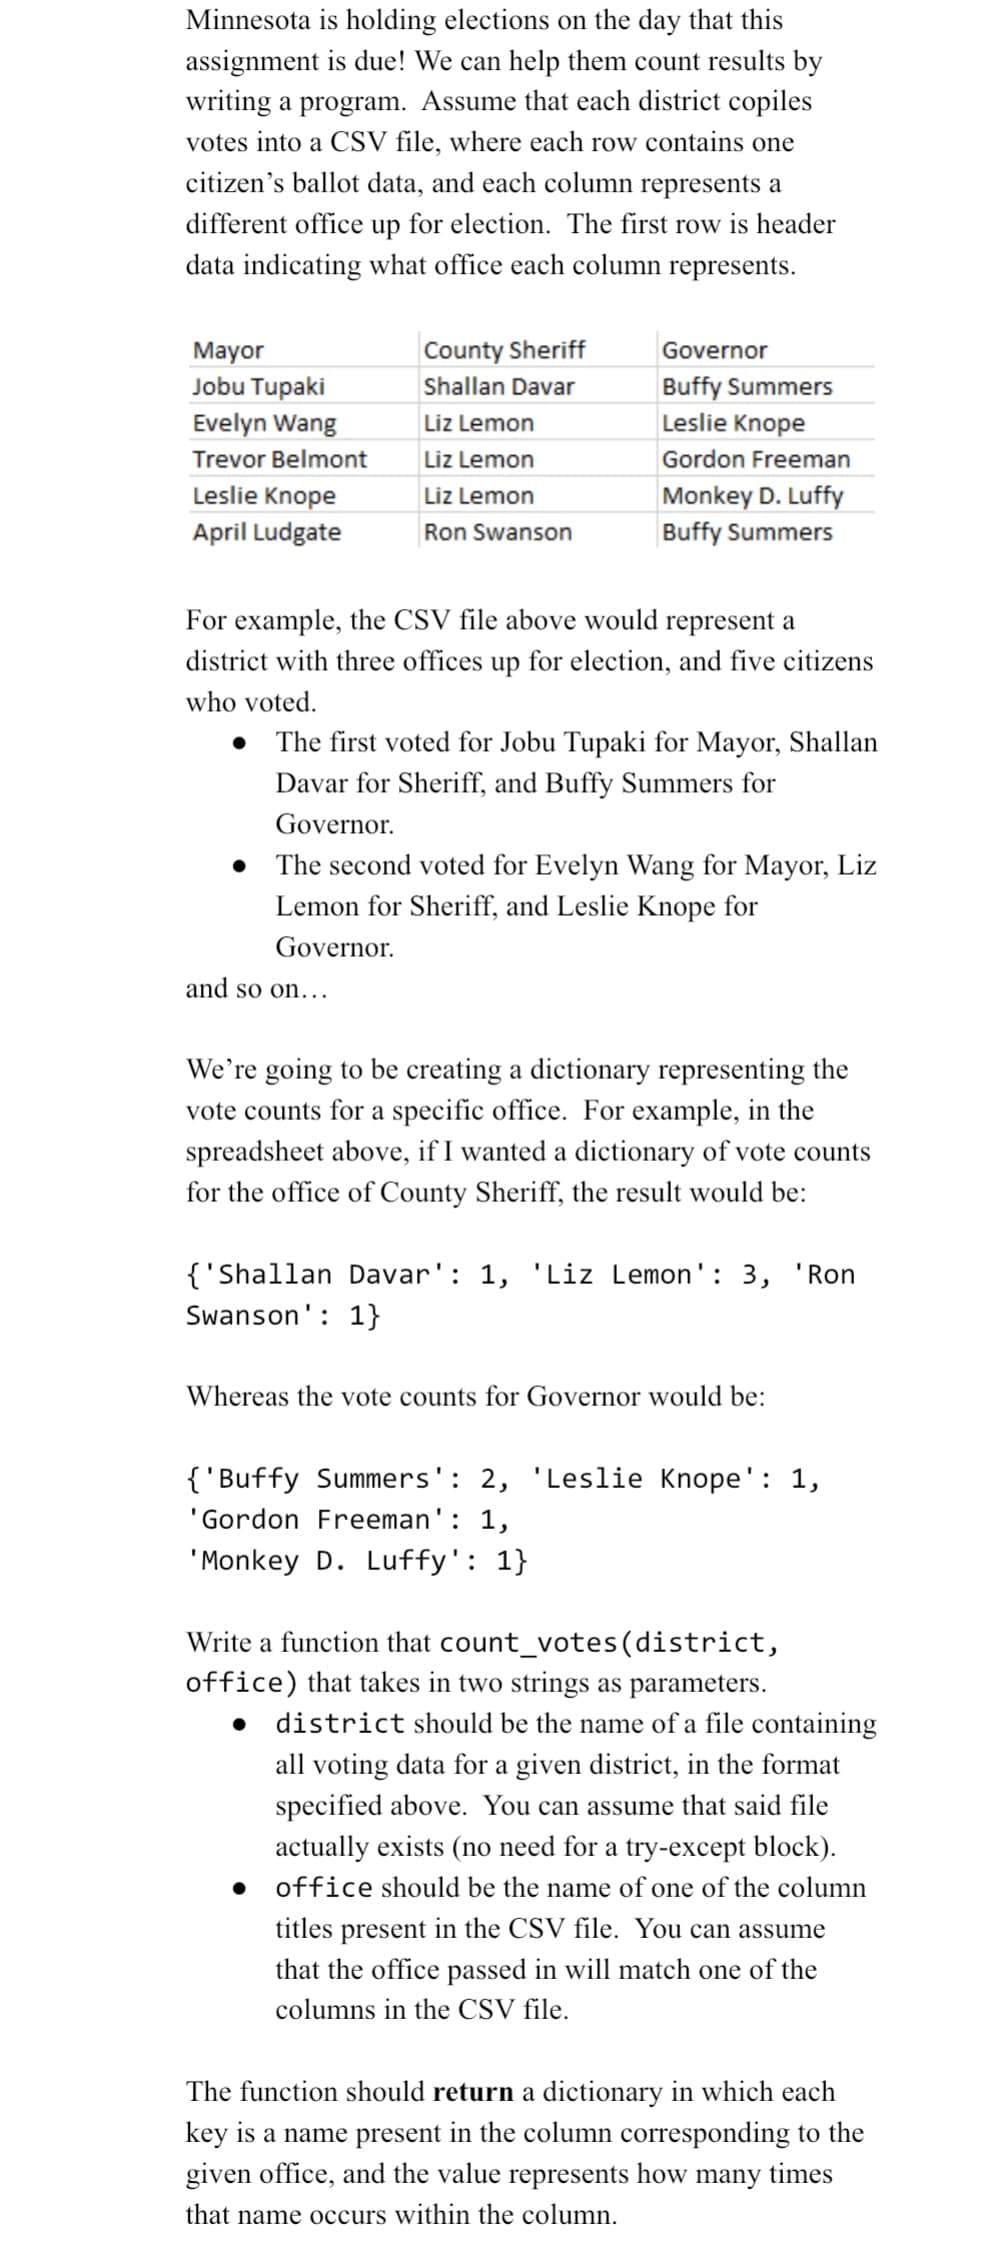 Minnesota is holding elections on the day that this
assignment is due! We can help them count results by
writing a program. Assume that each district copiles
votes into a CSV file, where each row contains one
citizen's ballot data, and each column represents a
different office up for election. The first row is header
data indicating what office each column represents.
Mayor
Jobu Tupaki
Evelyn Wang
Trevor Belmont
Leslie Knope
April Ludgate
●
●
County Sheriff
Shallan Davar
Liz Lemon
Liz Lemon
Liz Lemon
Ron Swanson
For example, the CSV file above would represent a
district with three offices up for election, and five citizens
who voted.
Governor
Buffy Summers
Leslie Knope
Gordon Freeman
and so on...
Monkey D. Luffy
Buffy Summers
The first voted for Jobu Tupaki for Mayor, Shallan
Davar for Sheriff, and Buffy Summers for
Governor.
The second voted for Evelyn Wang for Mayor, Liz
Lemon for Sheriff, and Leslie Knope for
Governor.
We're going to be creating a dictionary representing the
vote counts for a specific office. For example, in the
spreadsheet above, if I wanted a dictionary of vote counts
for the office of County Sheriff, the result would be:
{'Shallan Davar': 1, 'Liz Lemon': 3, 'Ron
Swanson': 1}
Whereas the vote counts for Governor would be:
{'Buffy Summers': 2, 'Leslie Knope': 1,
'Gordon Freeman': 1,
'Monkey D. Luffy': 1}
Write a function that count_votes (district,
office) that takes in two strings as parameters.
●
district should be the name of a file containing
all voting data for a given district, in the format
specified above. You can assume that said file
actually exists (no need for a try-except block).
• office should be the name of one of the column
titles present in the CSV file. You can assume
that the office passed in will match one of the
columns in the CSV file.
The function should return a dictionary in which each
key is a name present in the column corresponding to the
given office, and the value represents how many times
that name occurs within the column.